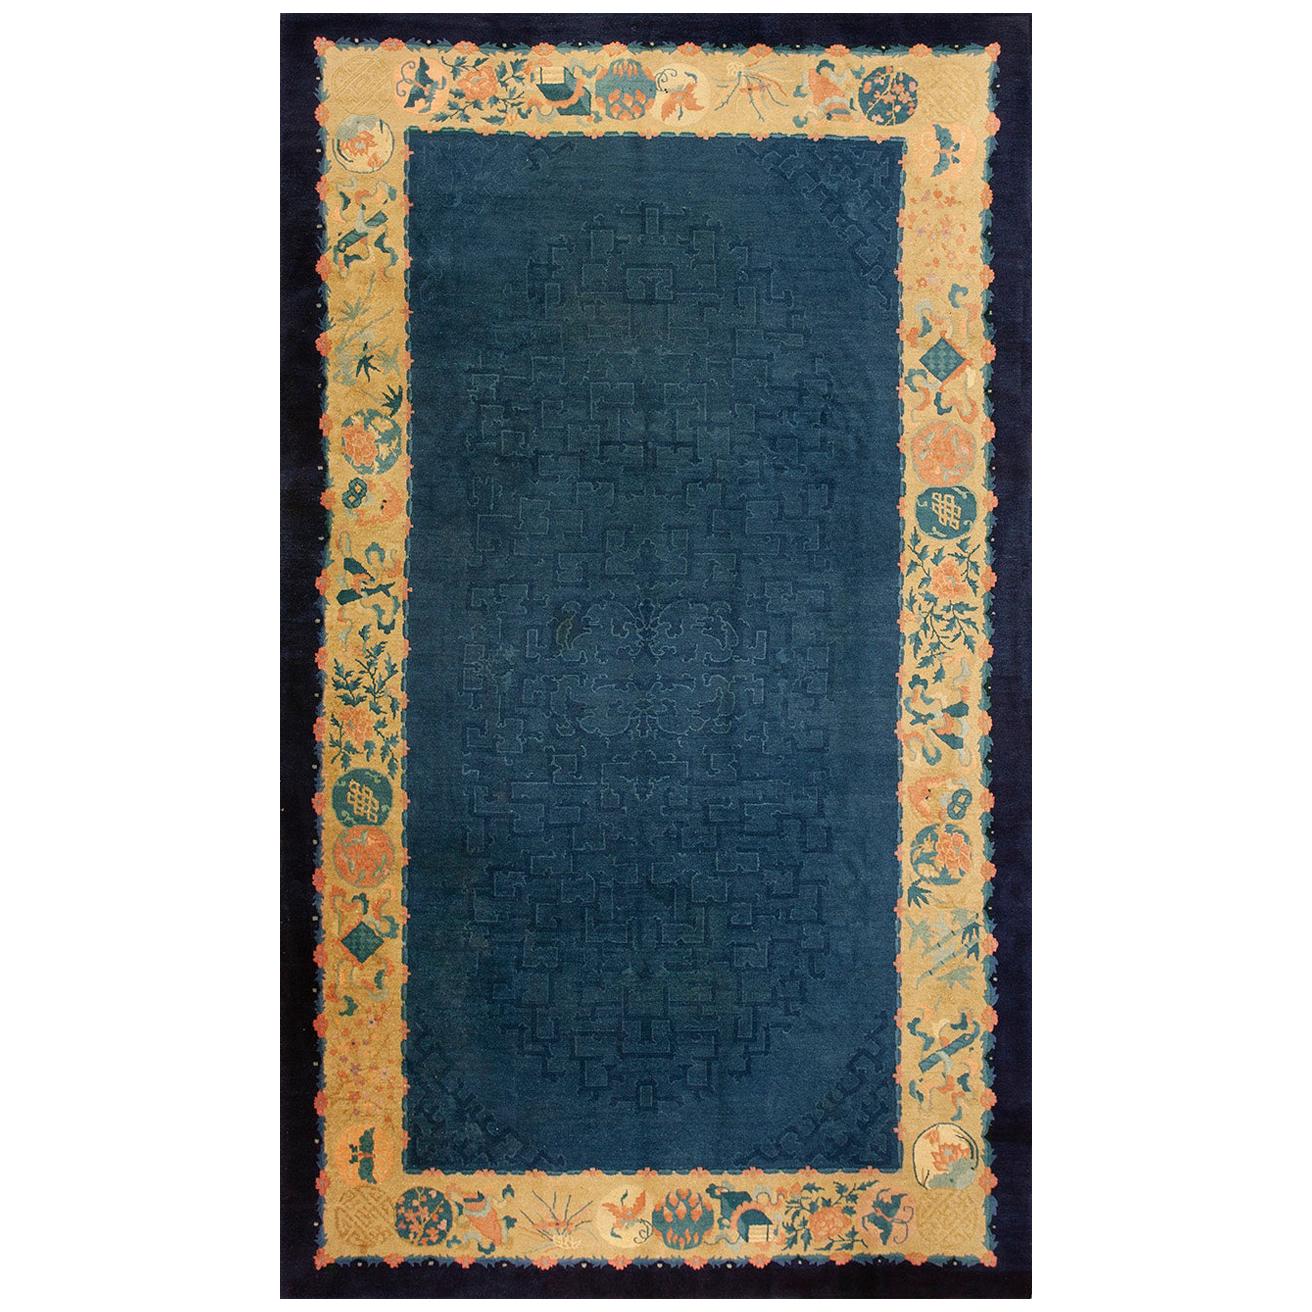 1920s Chinese Peking Carpet ( 6' 10" x 11' 8" - 208 x 355 cm ) For Sale